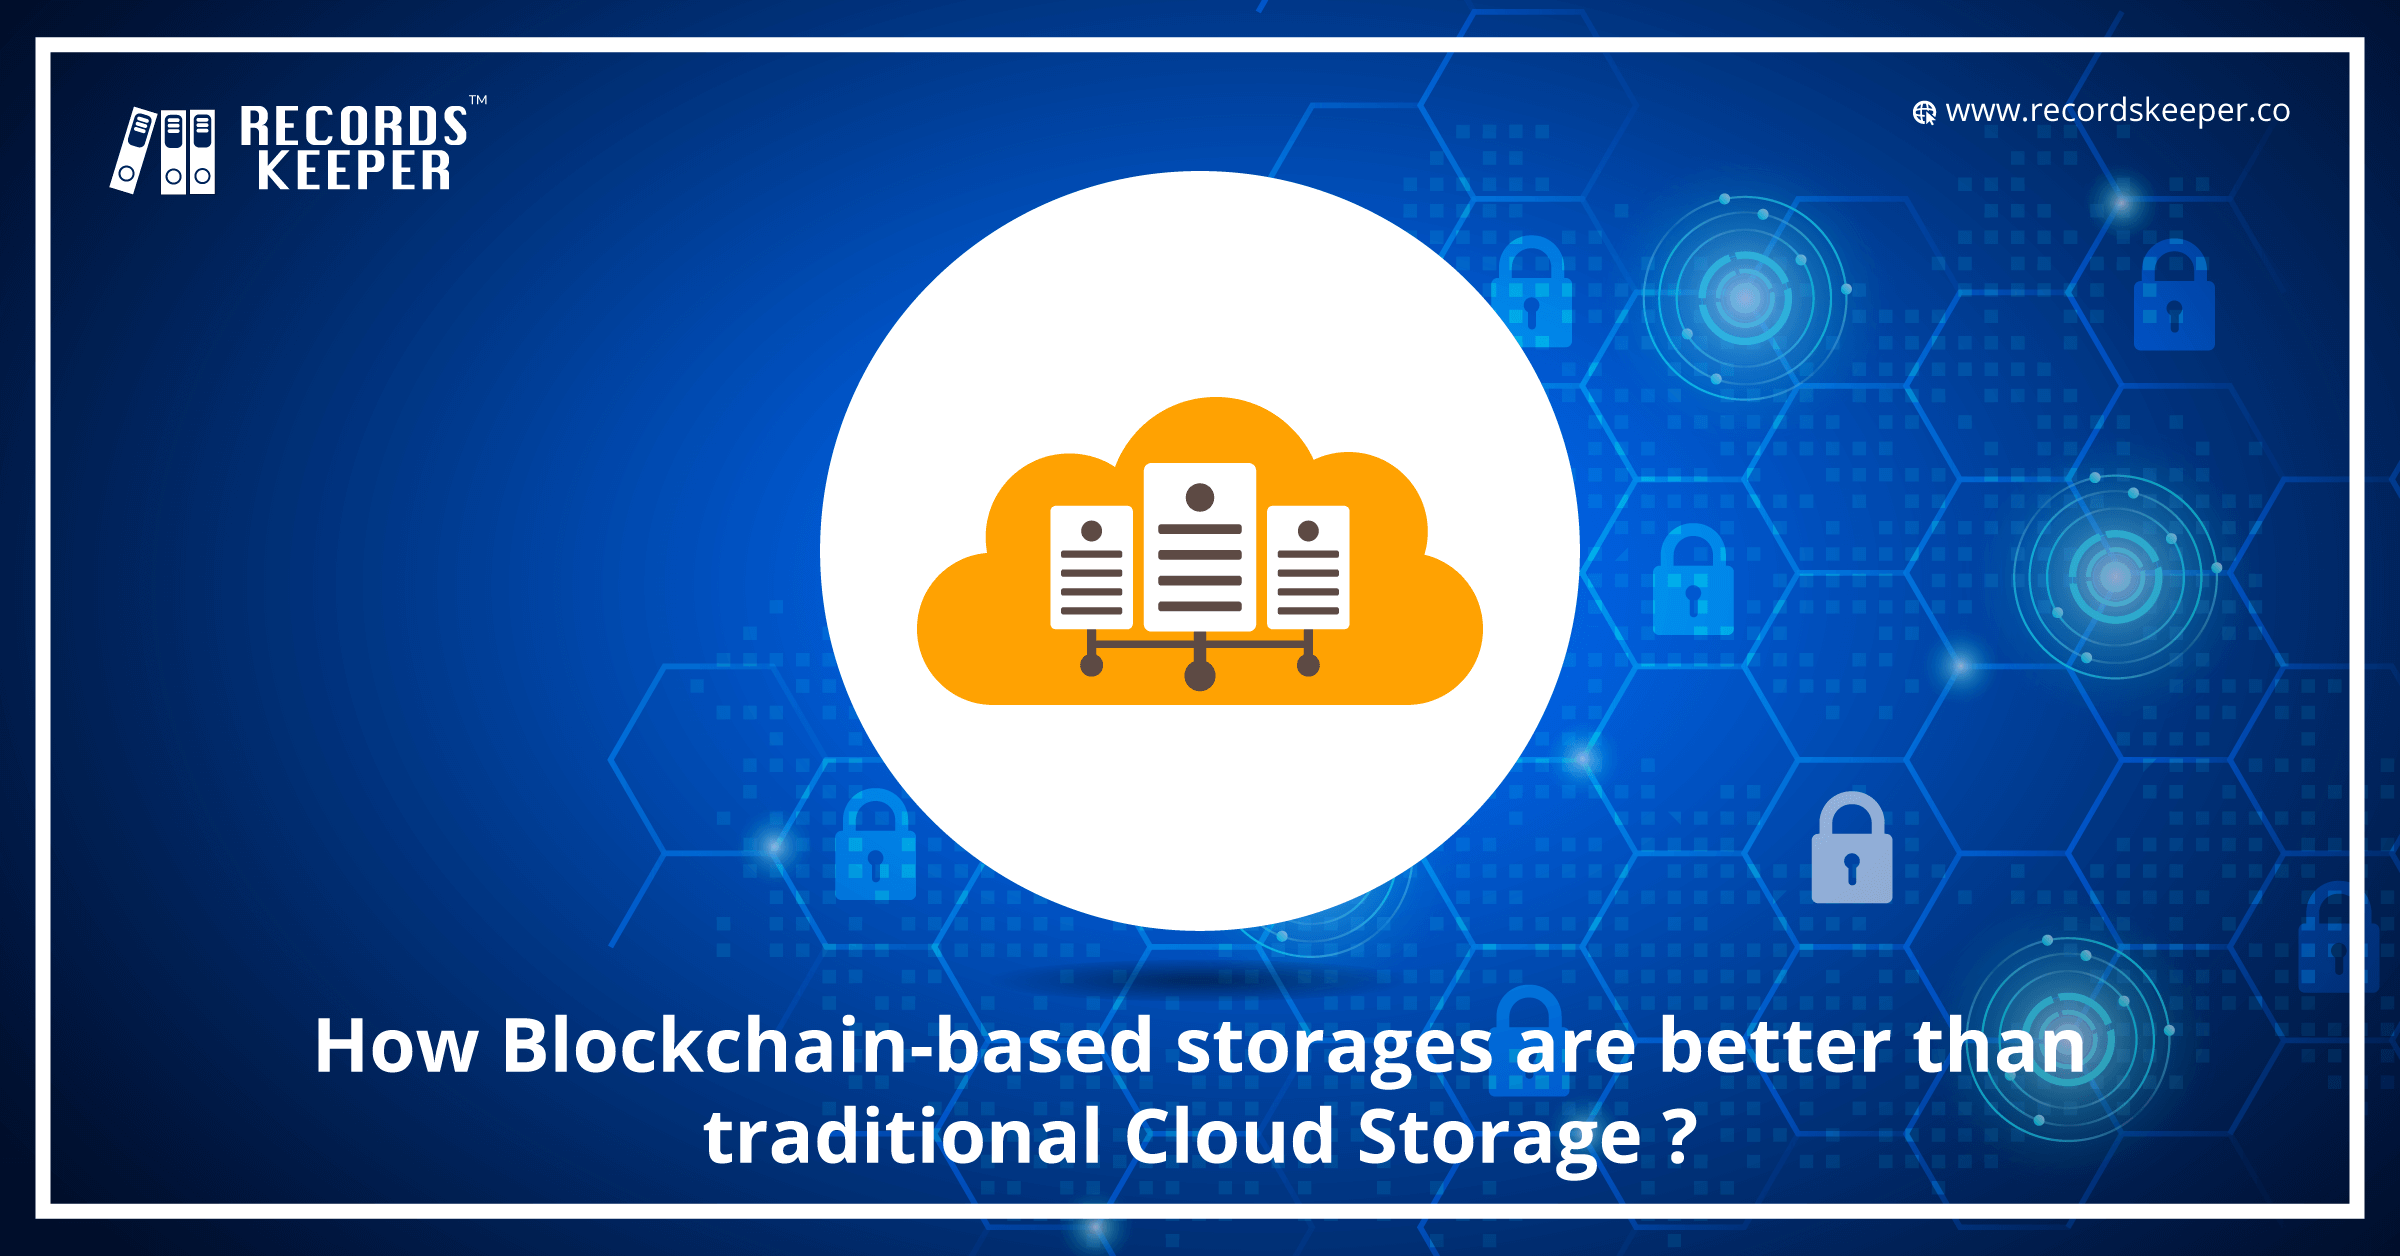 How Blockchain Based Storages are Better than the Traditional Cloud Storage?